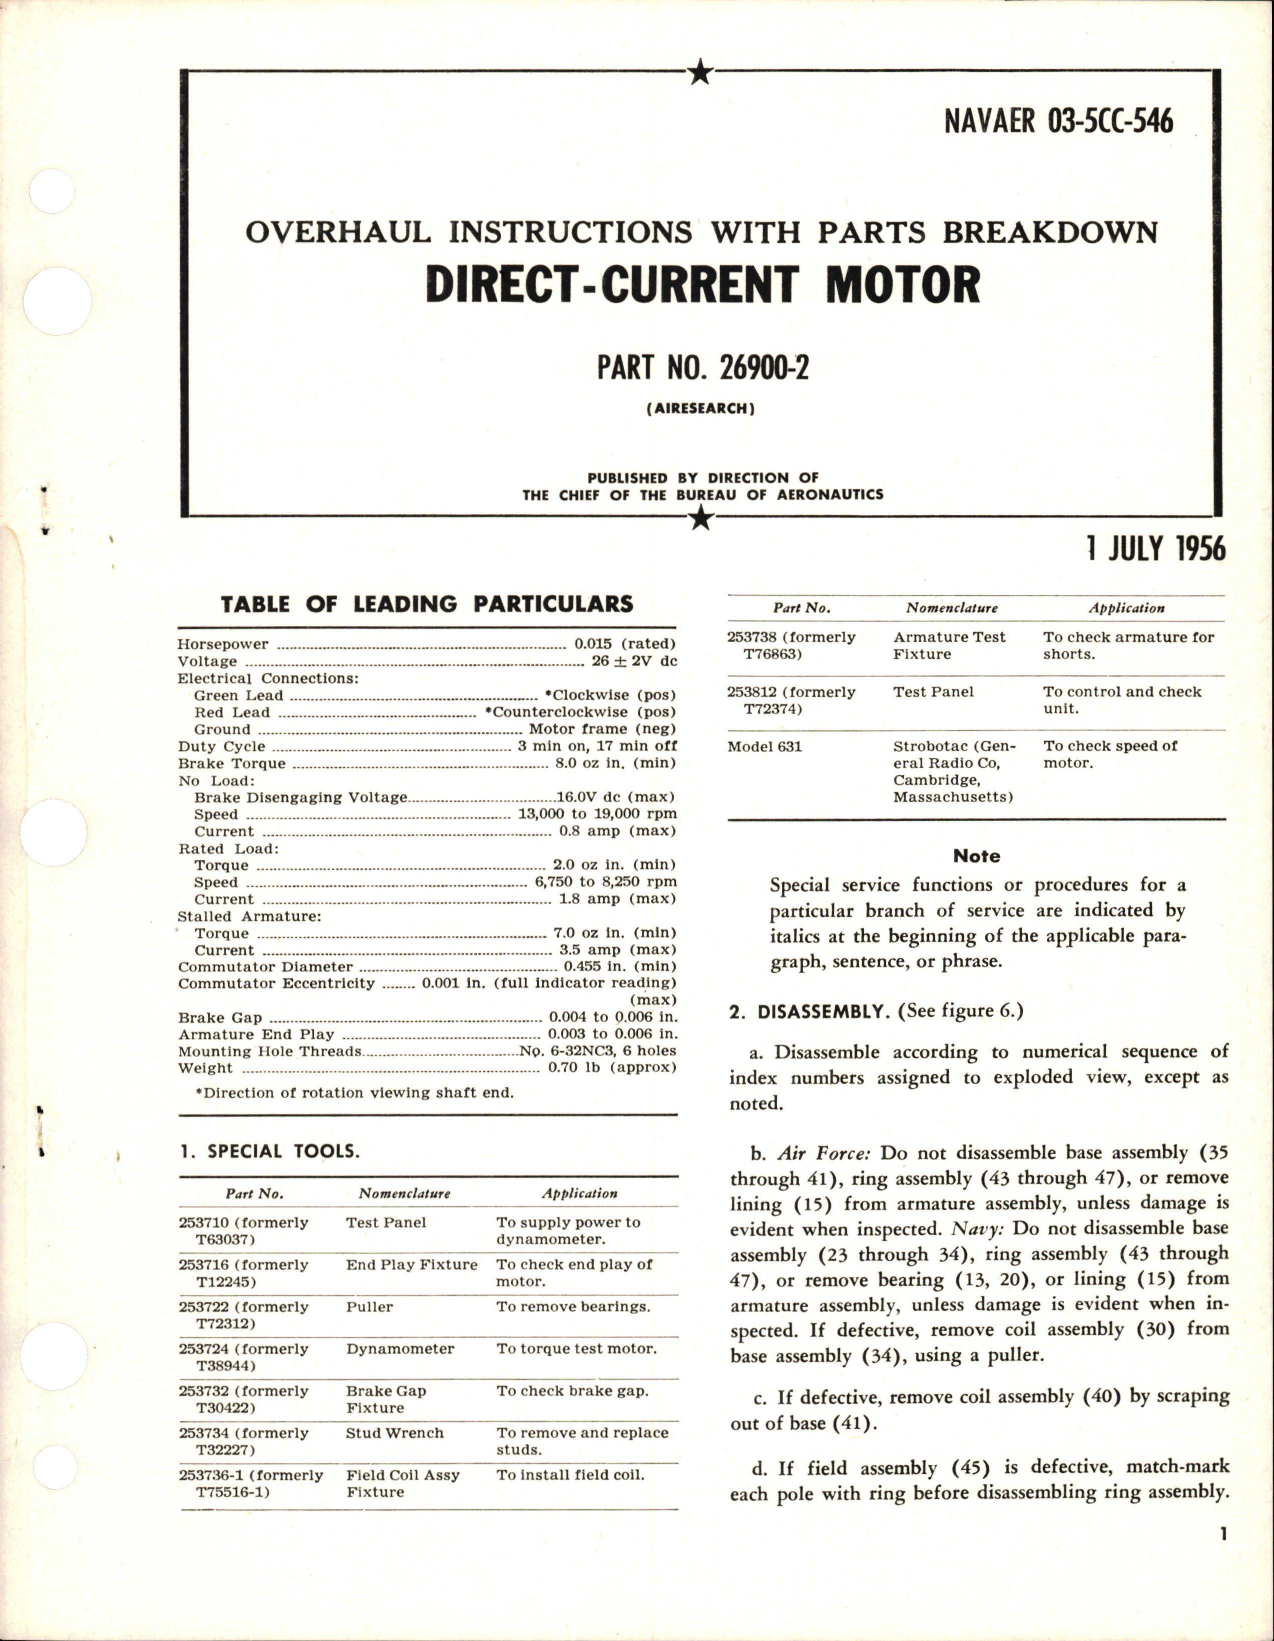 Sample page 1 from AirCorps Library document: Overhaul Instructions with Parts Breakdown for Direct Current Motor - Part 26900-2